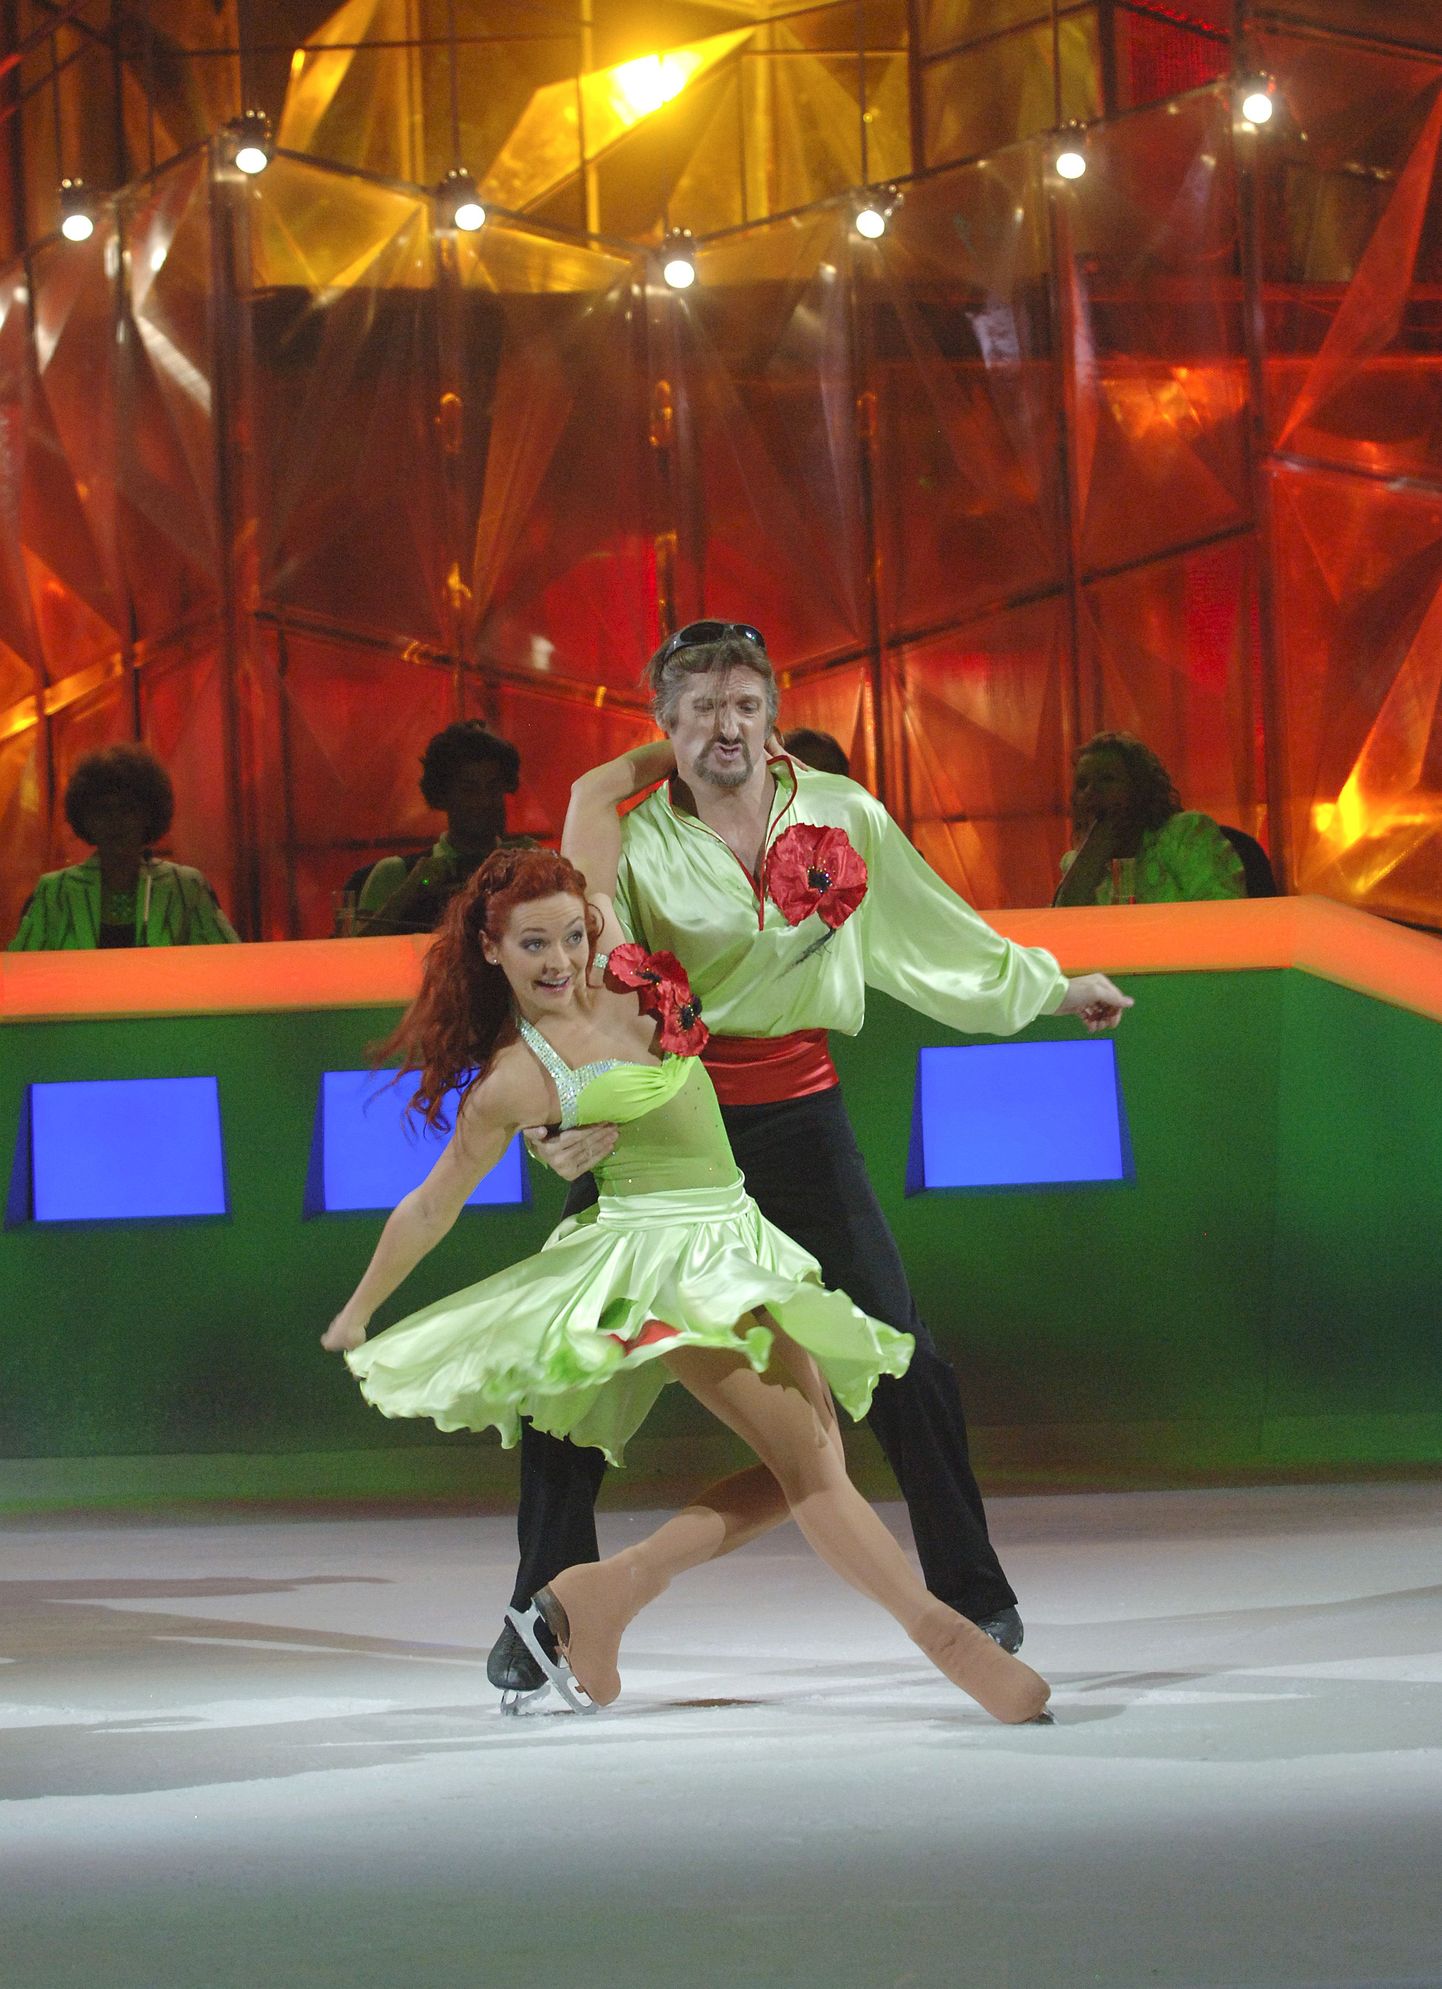 ITAR-TASS 20: MOSCOW, RUSSIA. SEPTEMBER 5. Olympic Champion in ice dancing Marina Anissina and actor Nikita Dzhigurda perform during the Dancing on Ice. Velvet Season television show transmitted by channel Rossiya. (Photo ITAR-TASS / Grigory Sysoyev)